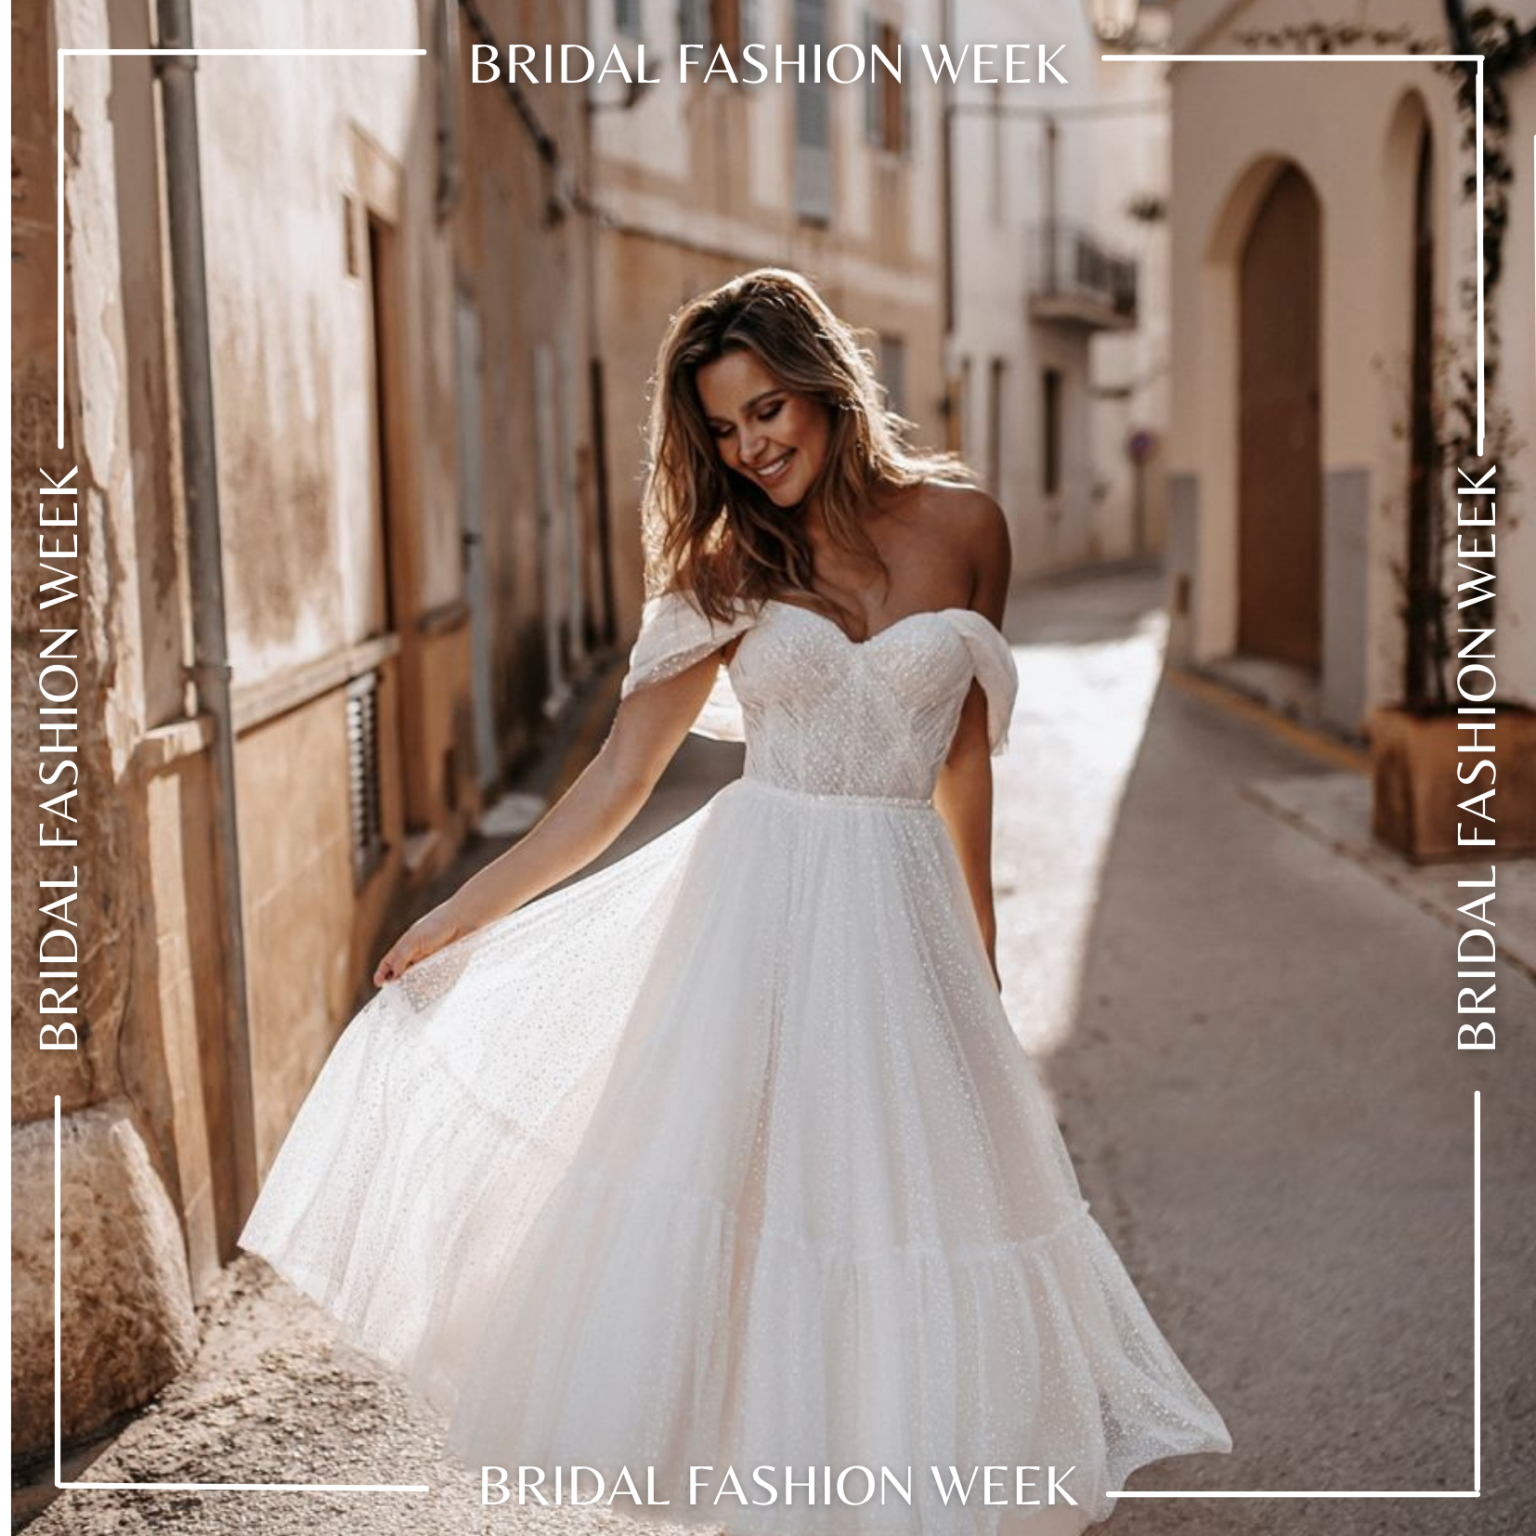 9 Chic Short Wedding Dresses For The After Party - Wedding Journal